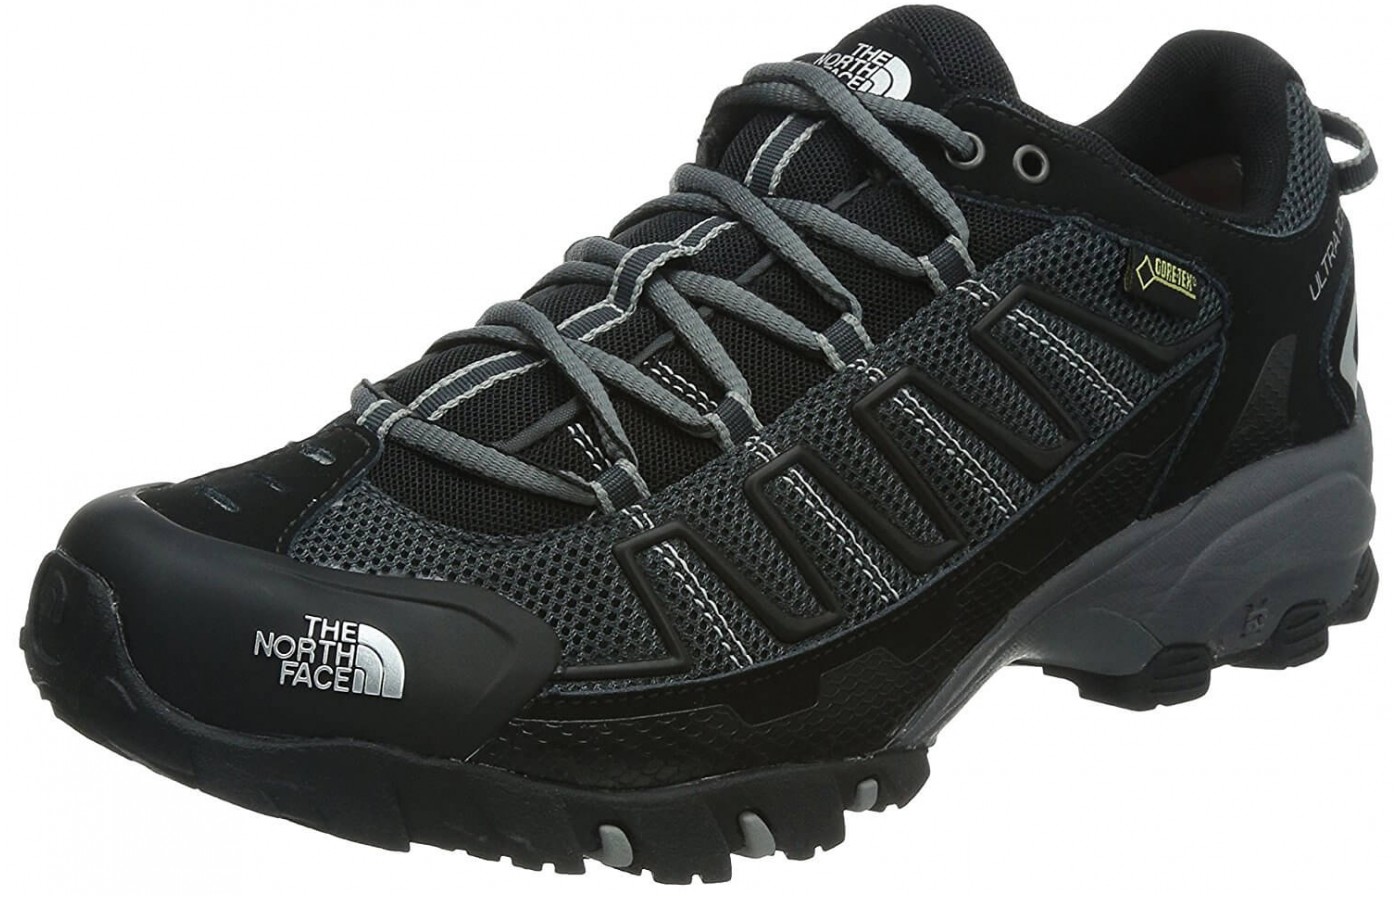 The The North Face Ultra 110 GTX features an EVA midsole